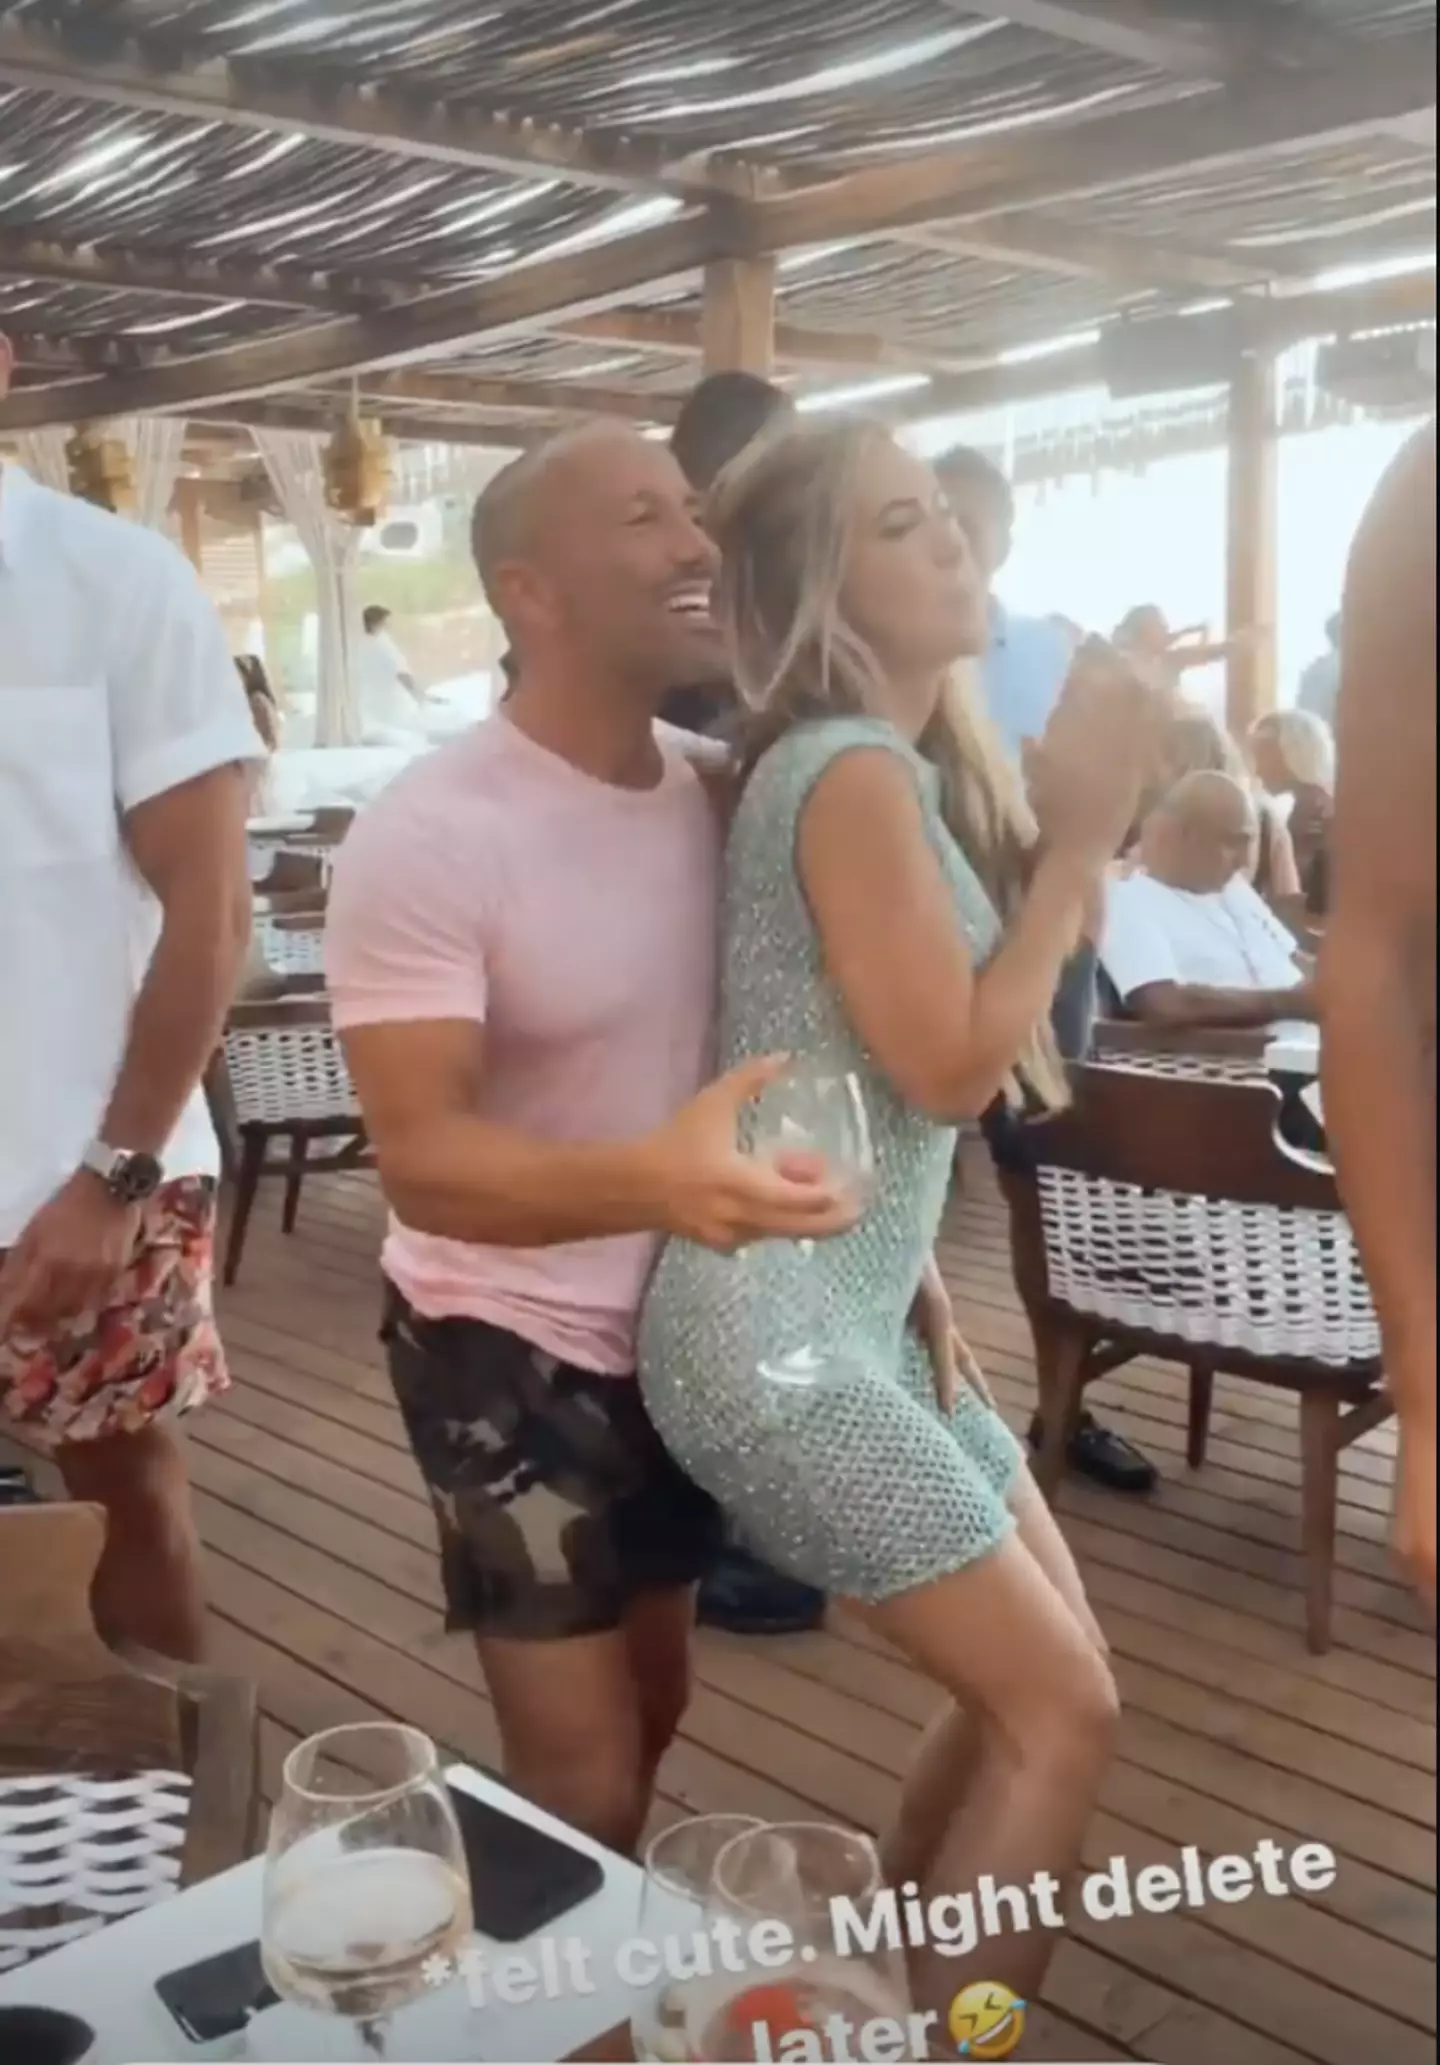 Jason and Chrishell were filmed dancing at a party (